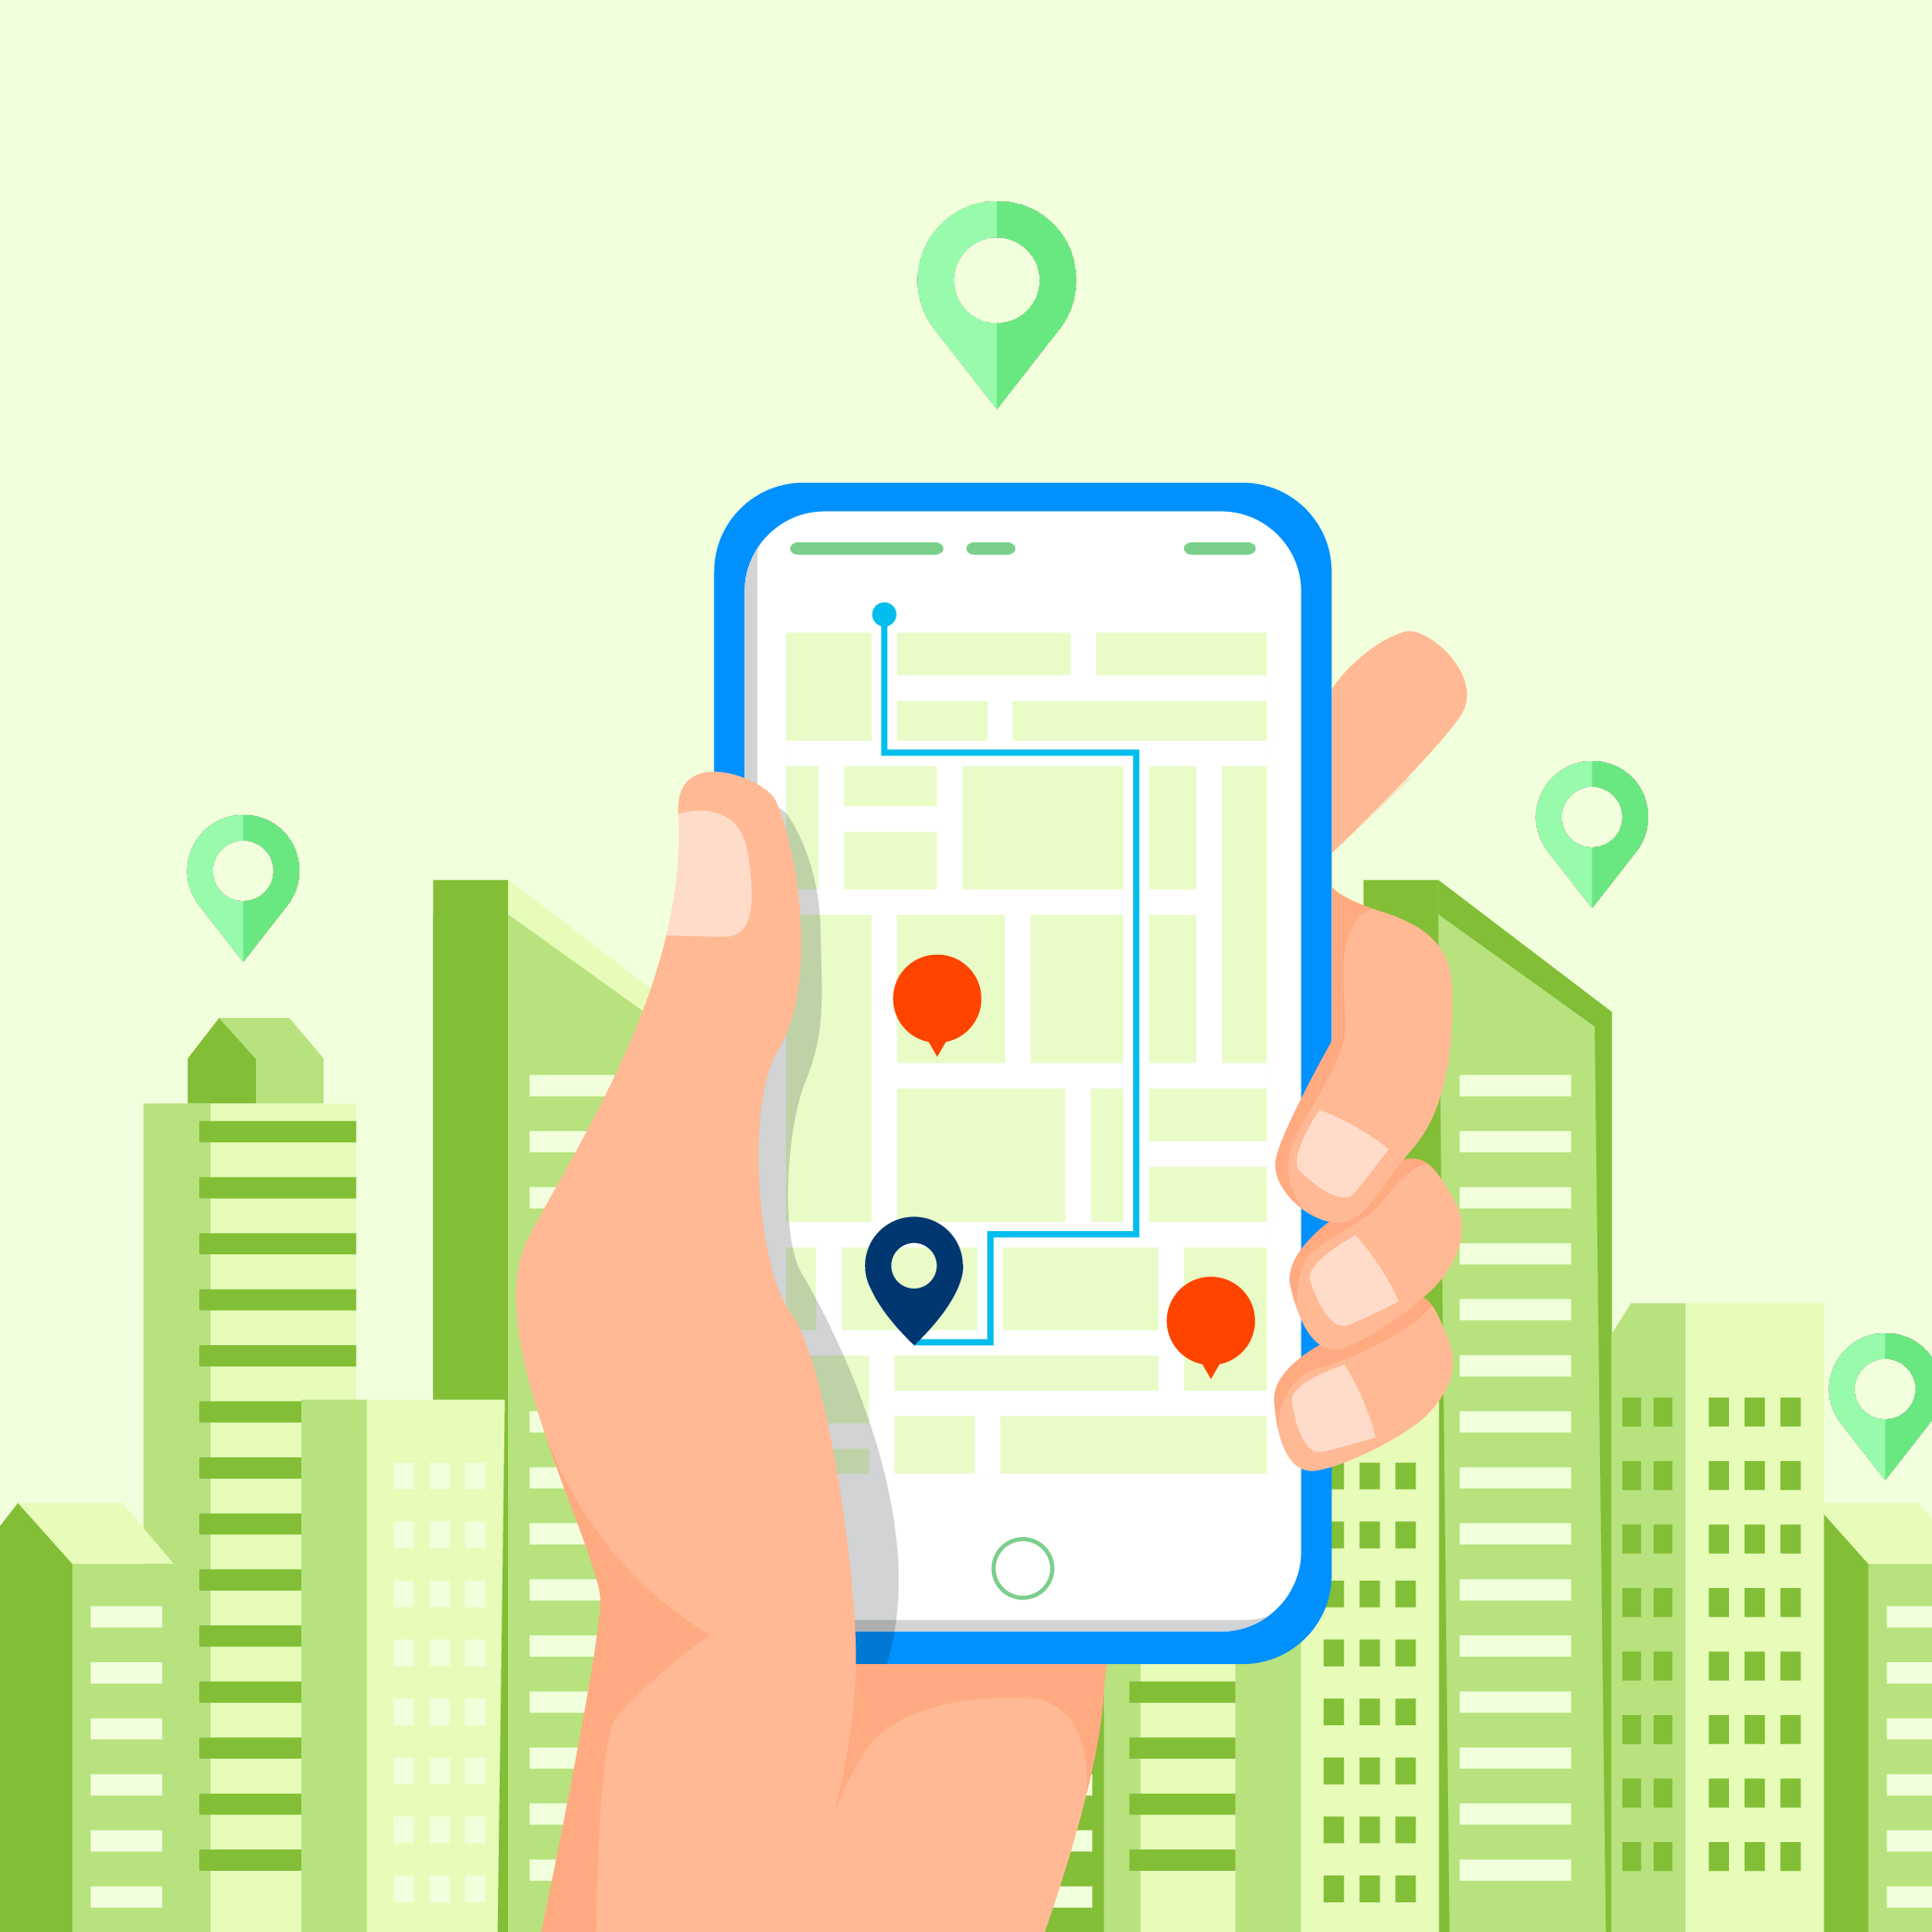 Location Based Services A Flourishing Technology